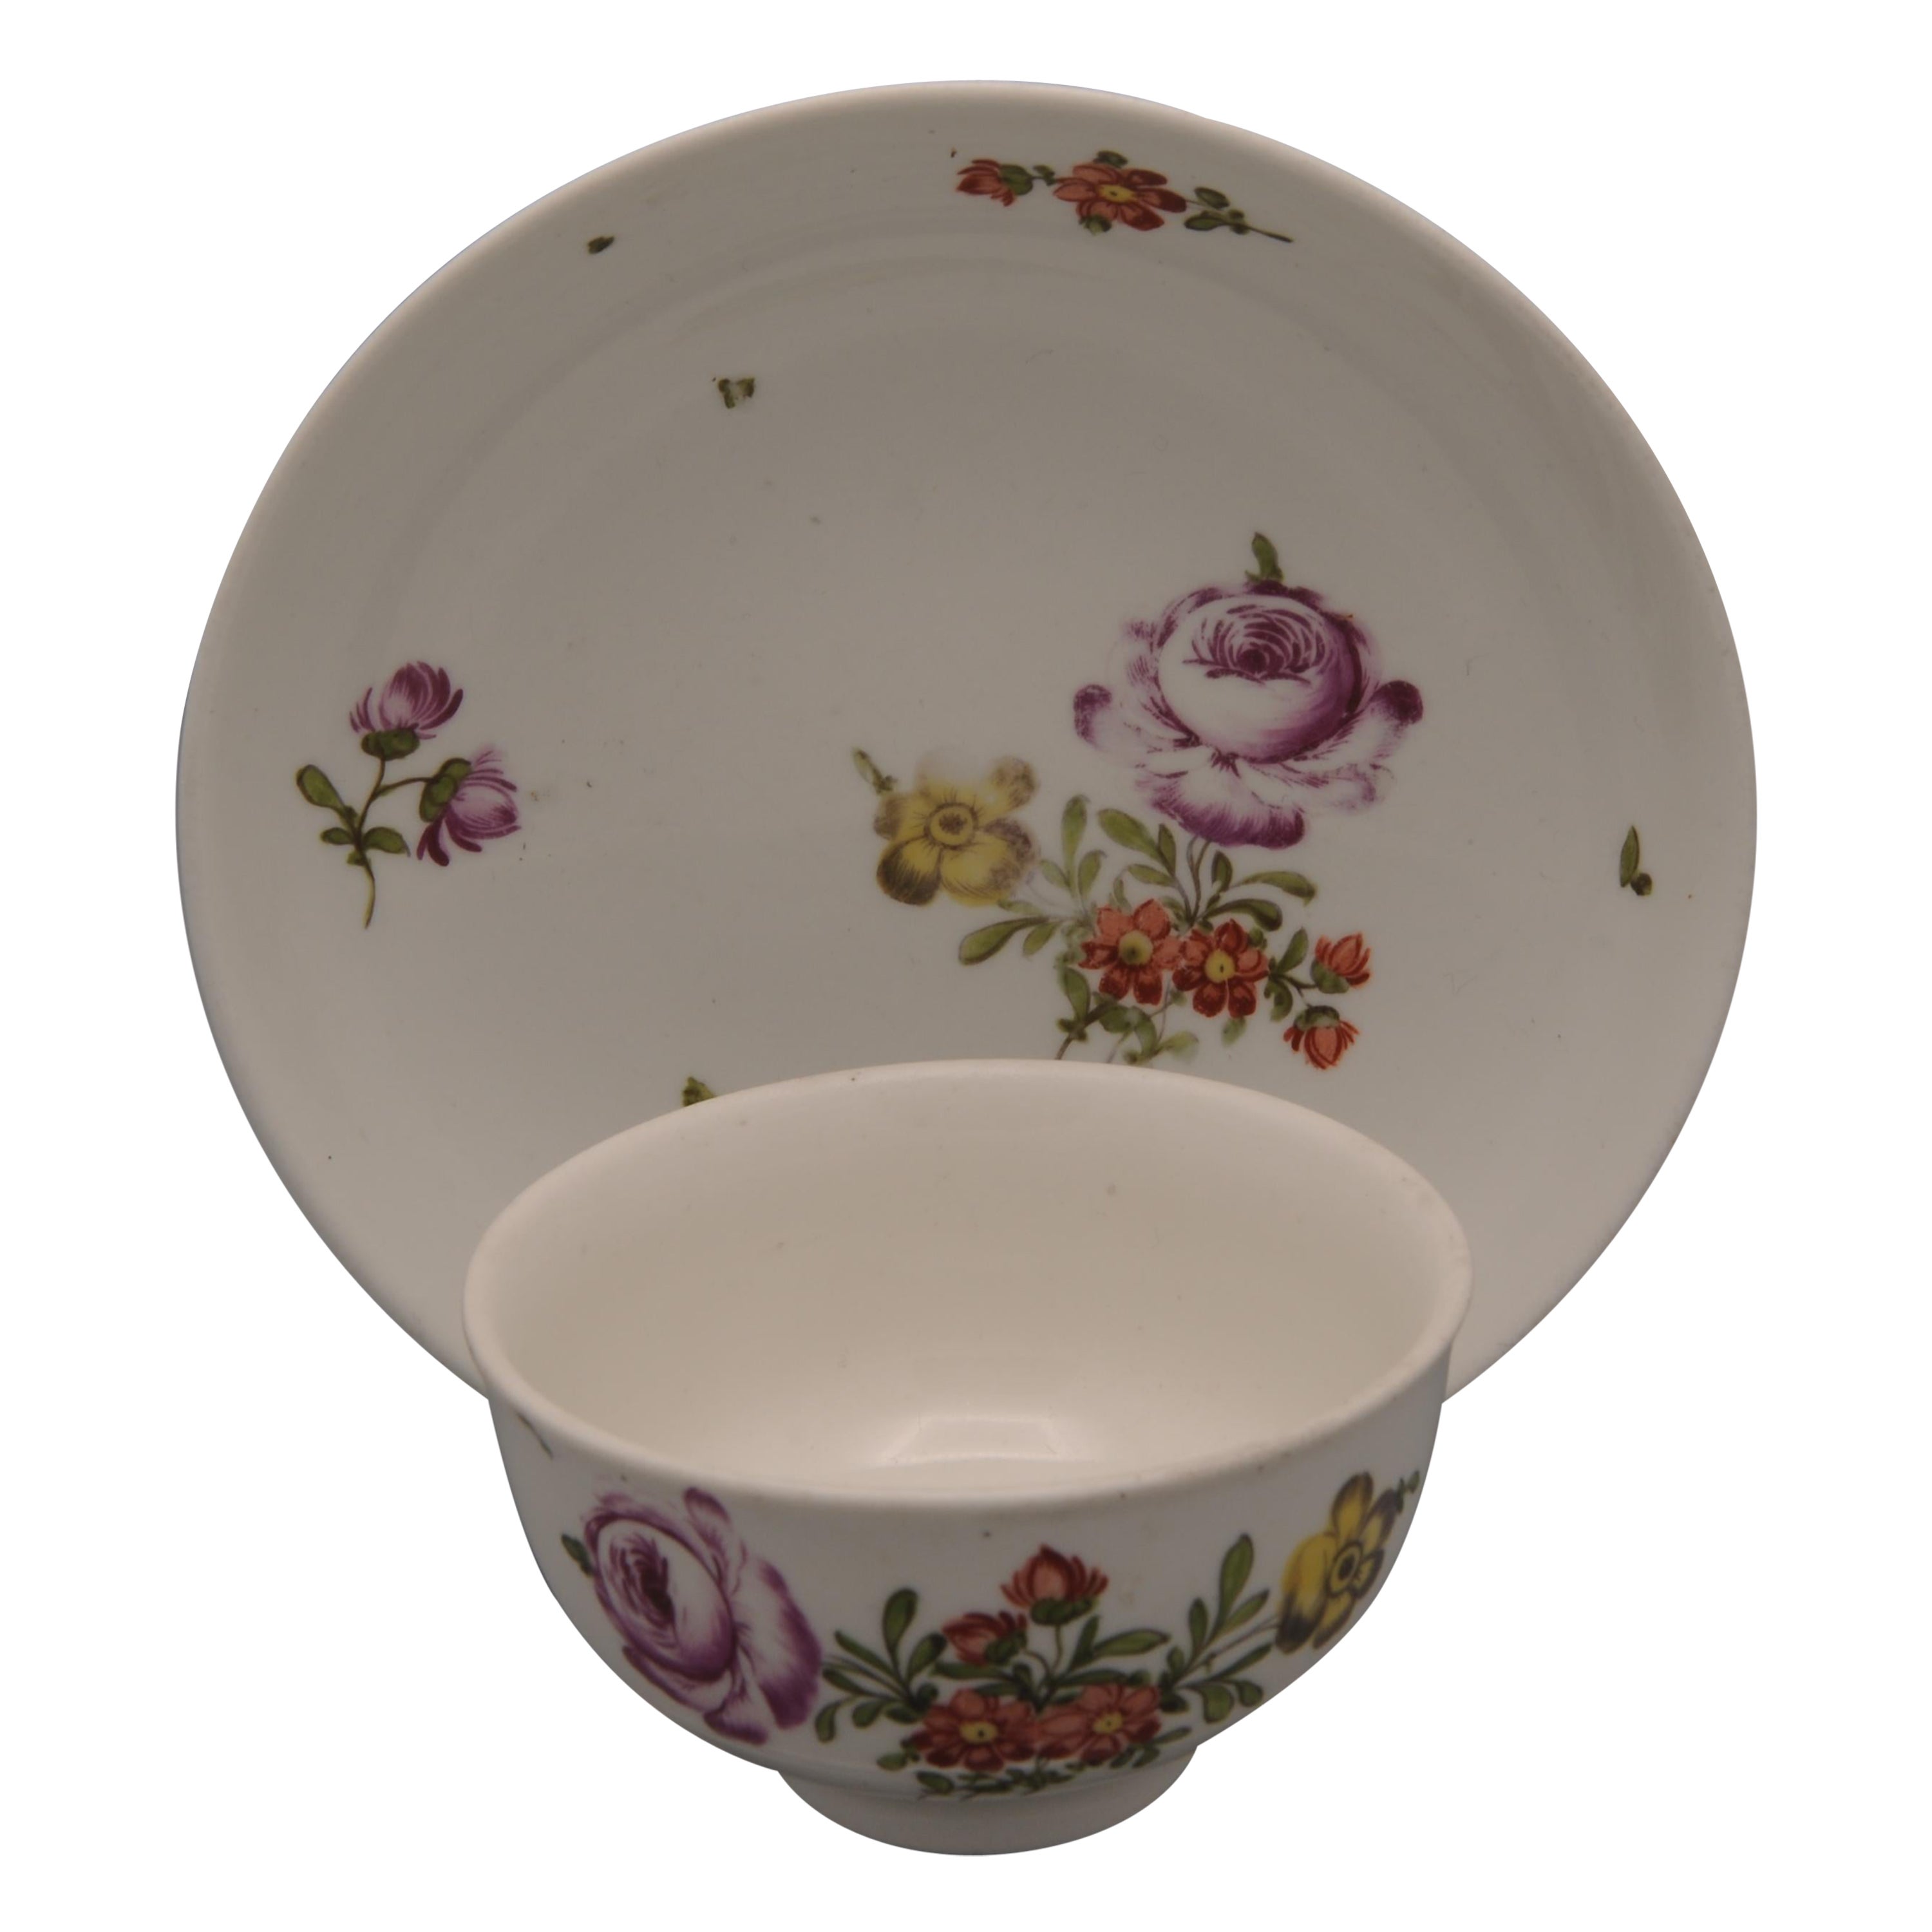 Vienna Porcelain - Rococo Cup and Saucer, late 18th century For Sale